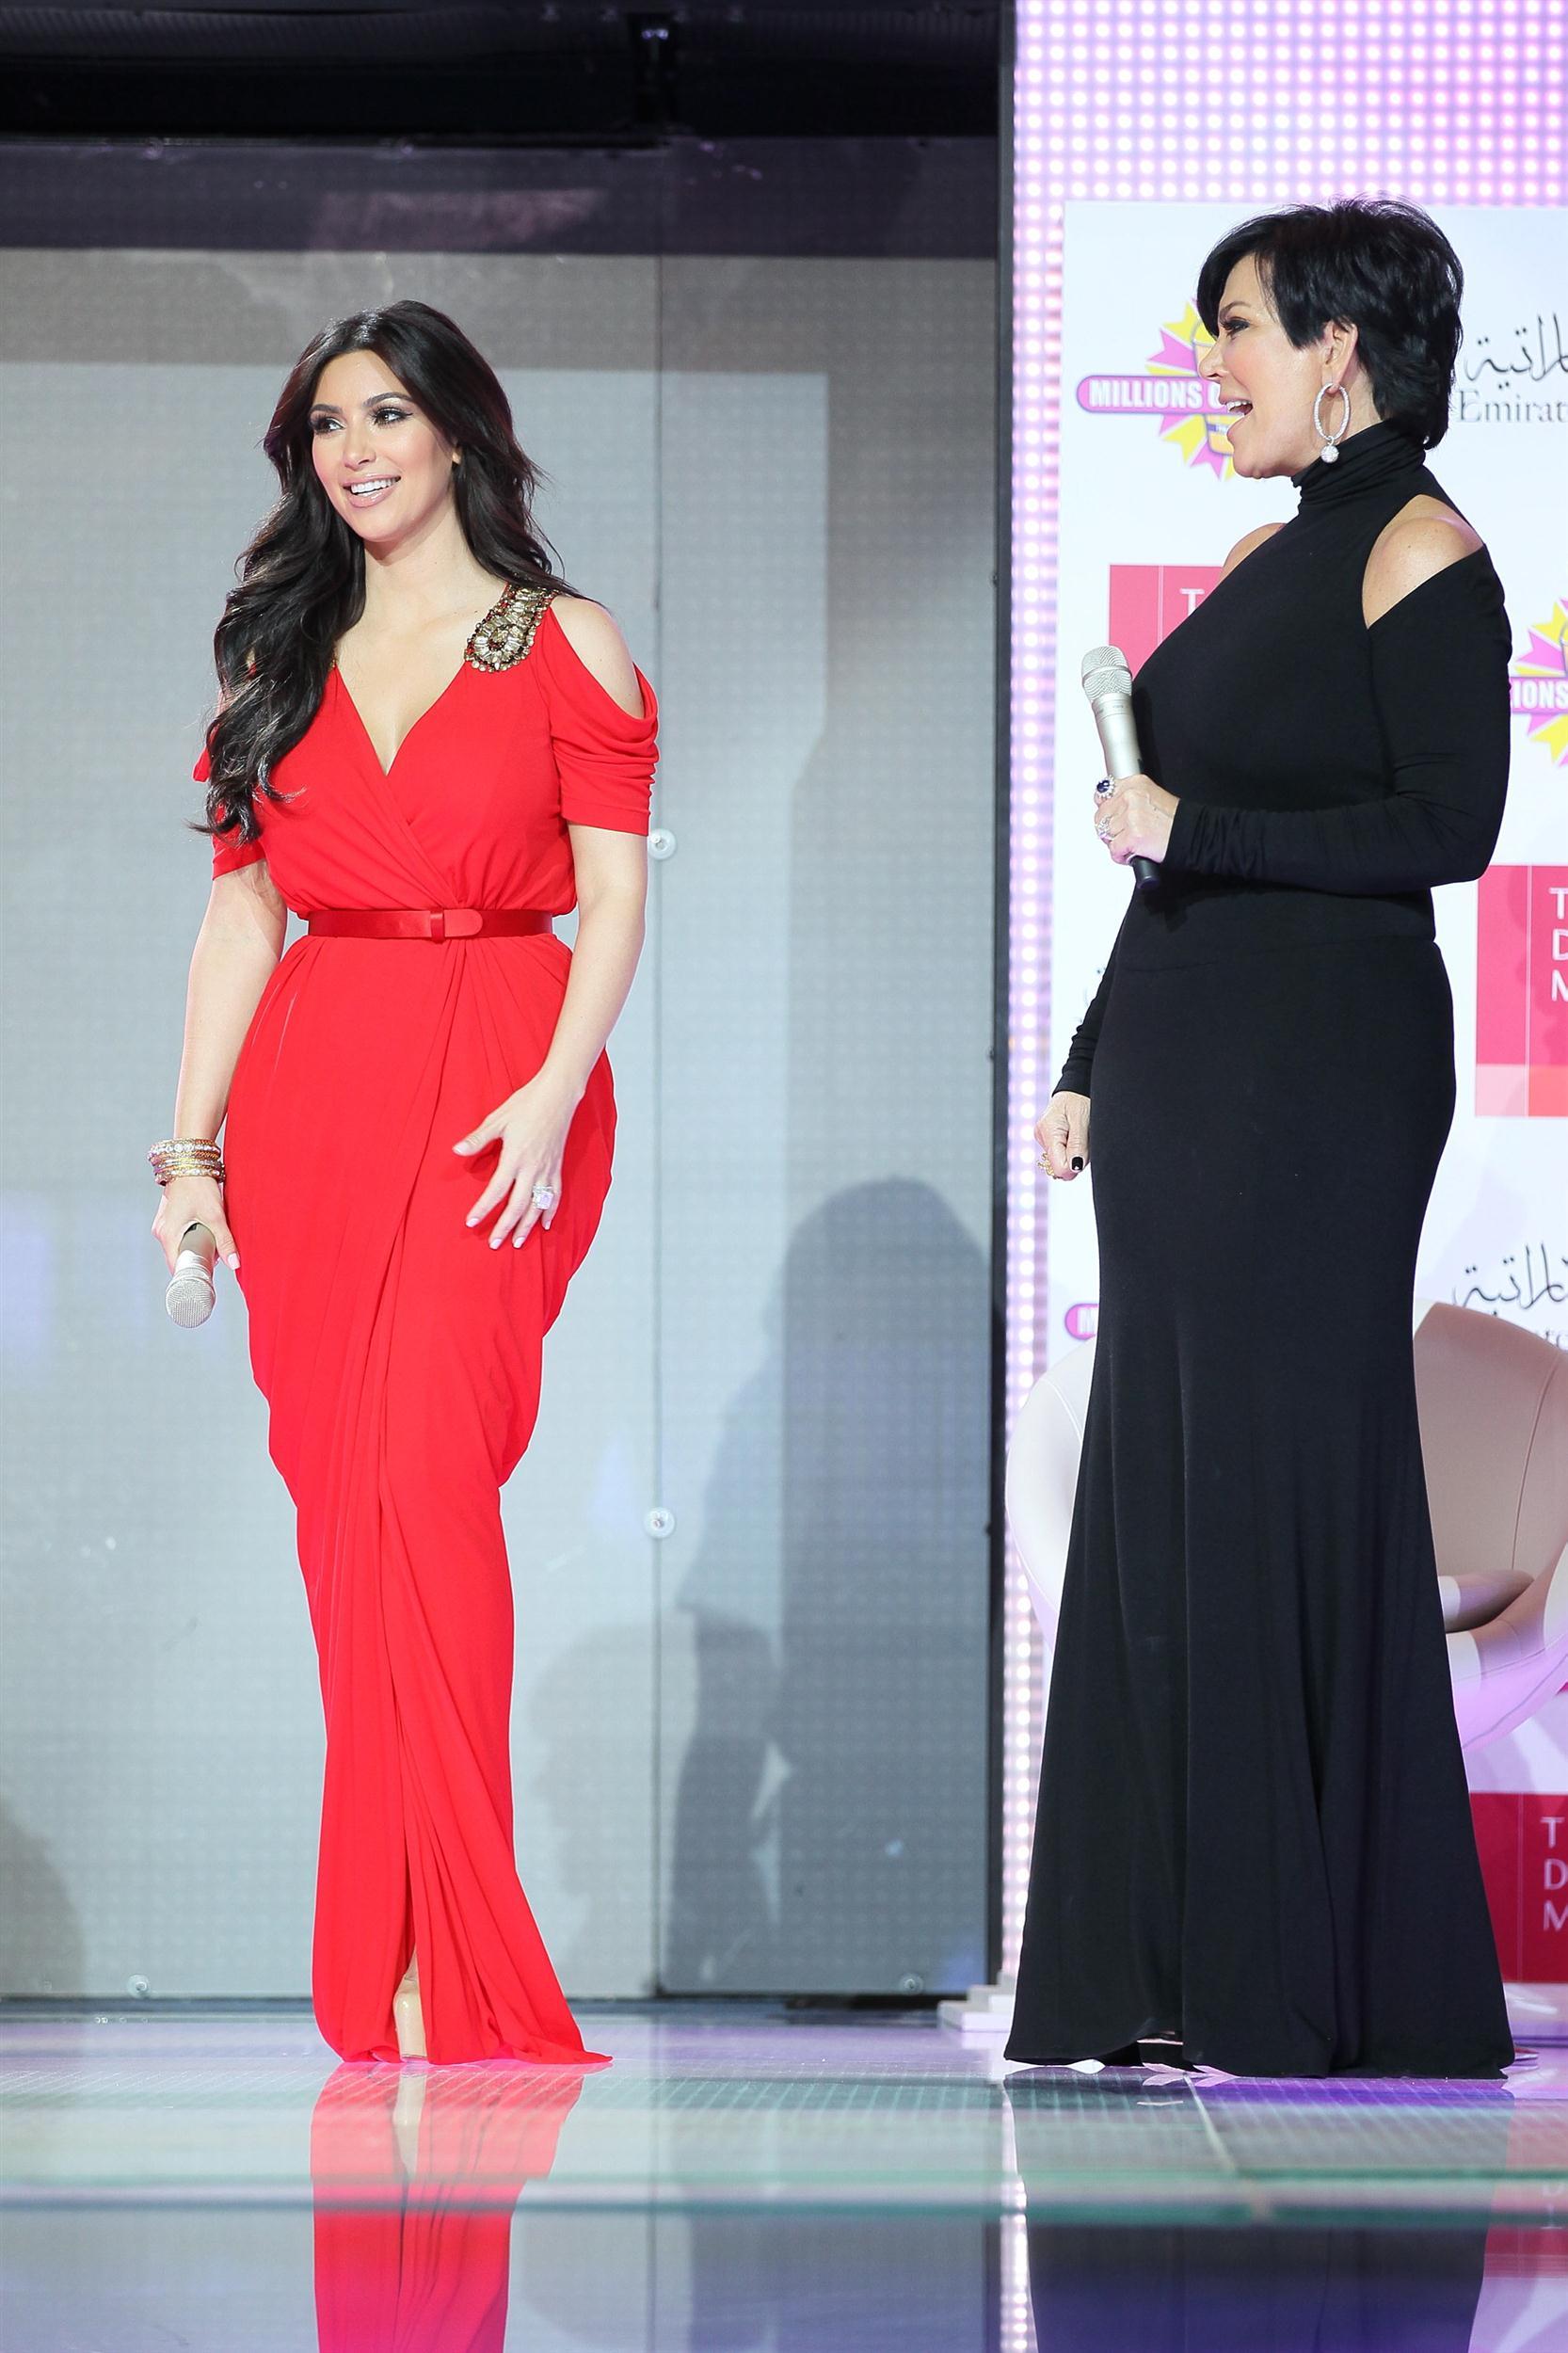 Kim Kardashian and Kris Jenner appear on a catwalk in the middle of the Dubai Mall | Picture 102861